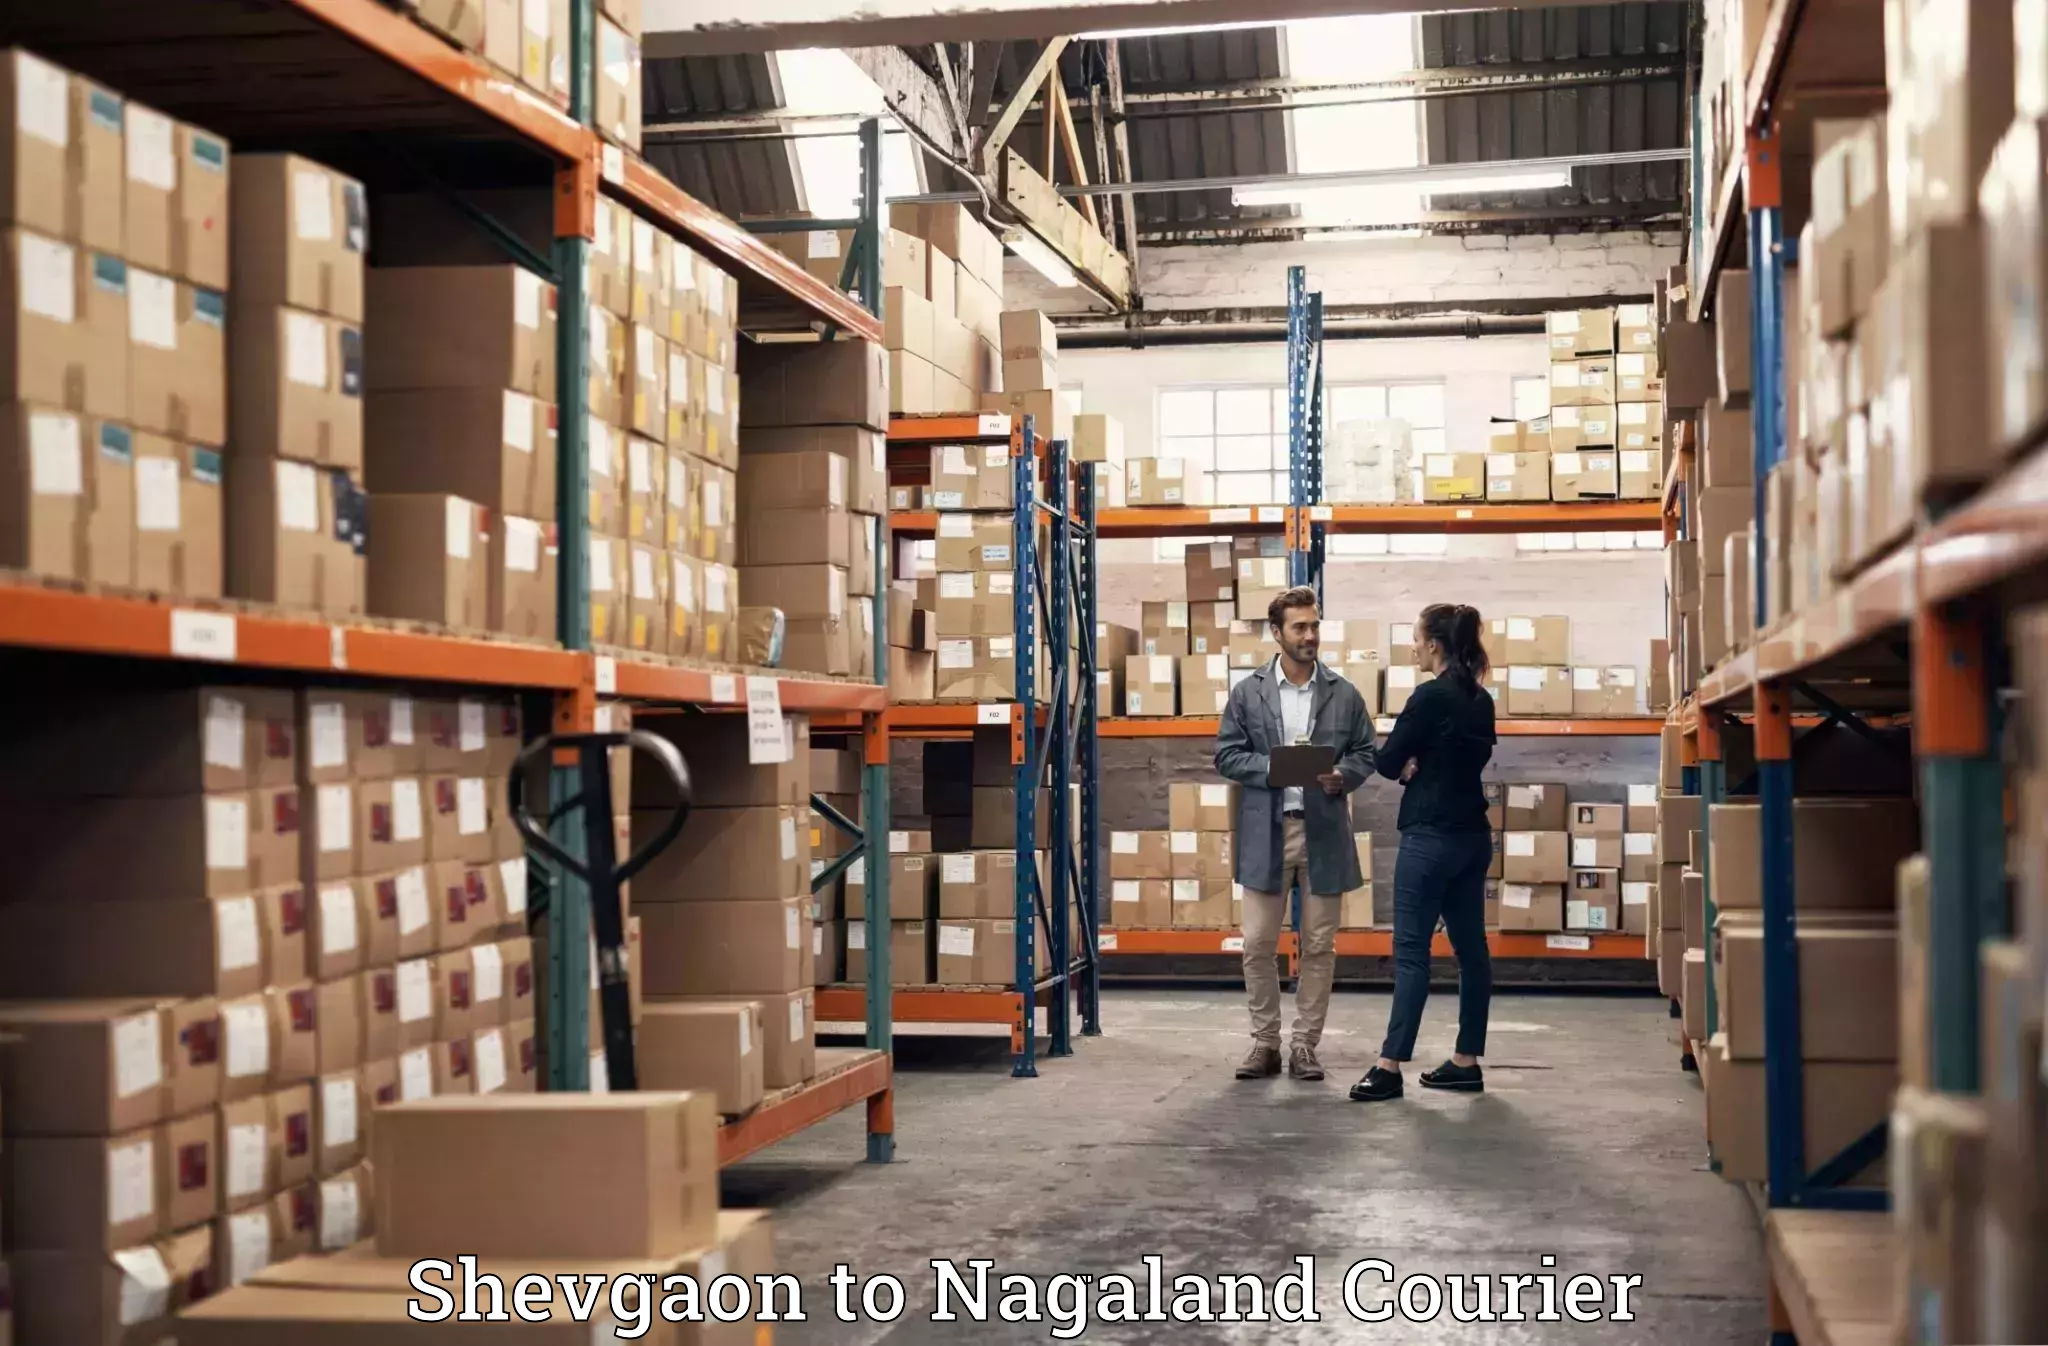 Luggage transport consulting Shevgaon to Nagaland